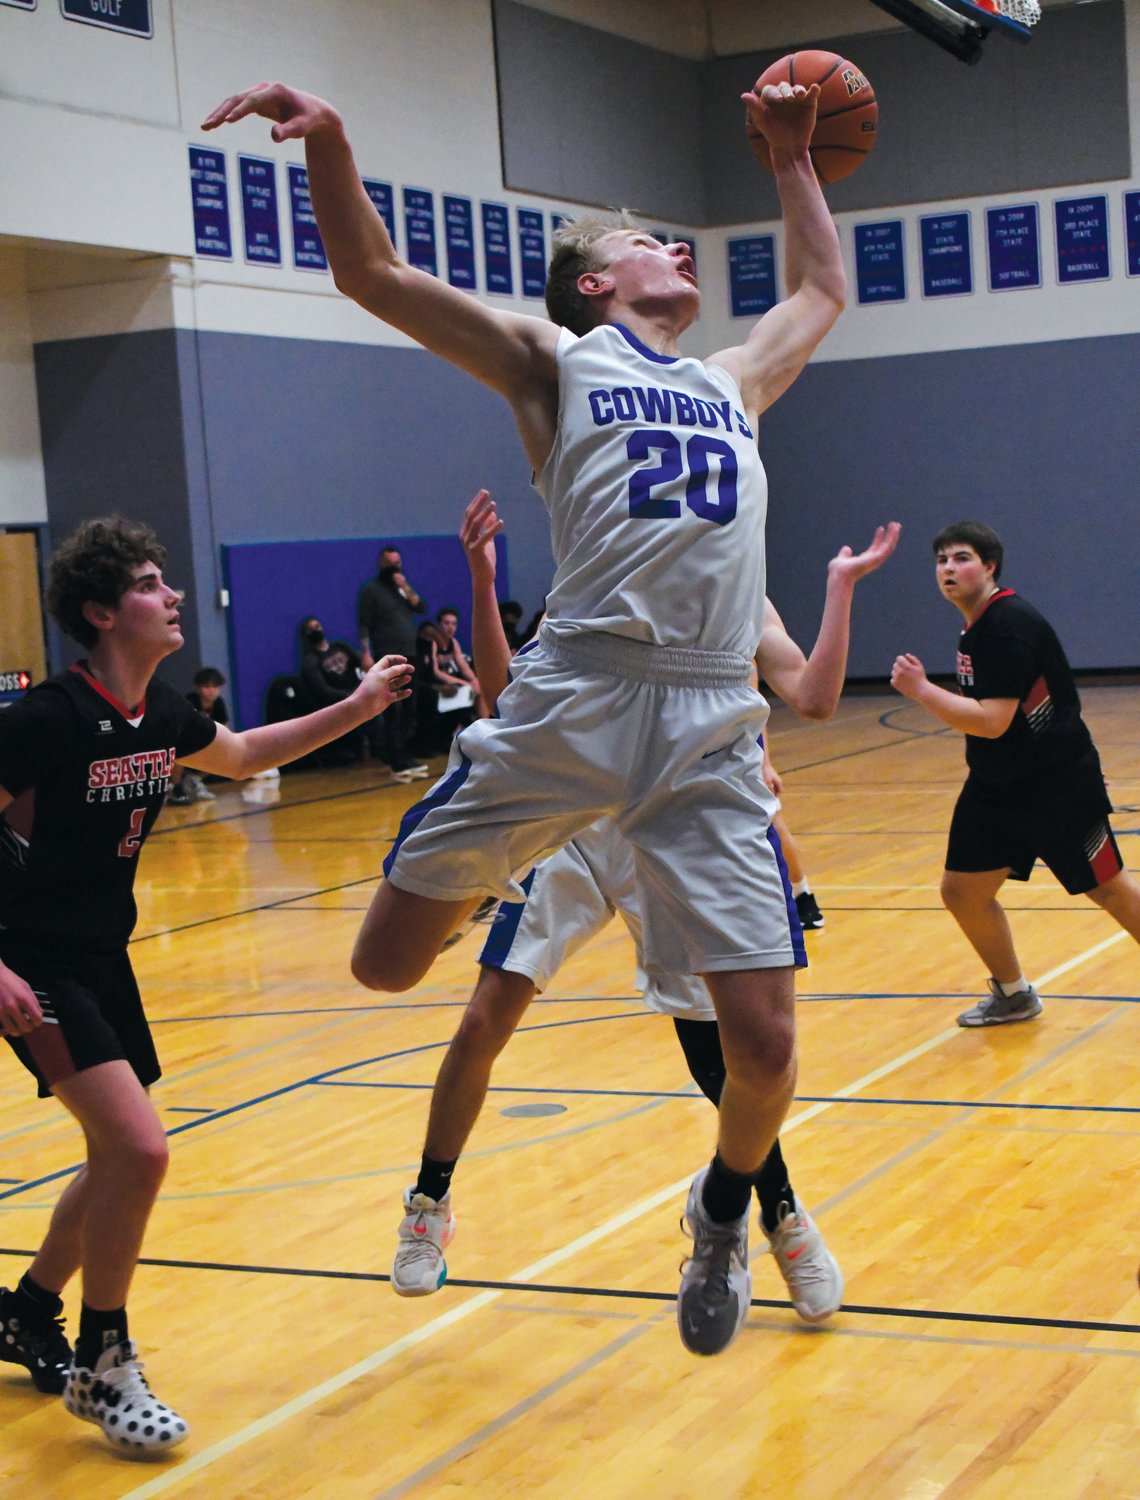 EJ senior Cade Martin scrambles for a rebound, stretching out for the ball as it glides over his head.